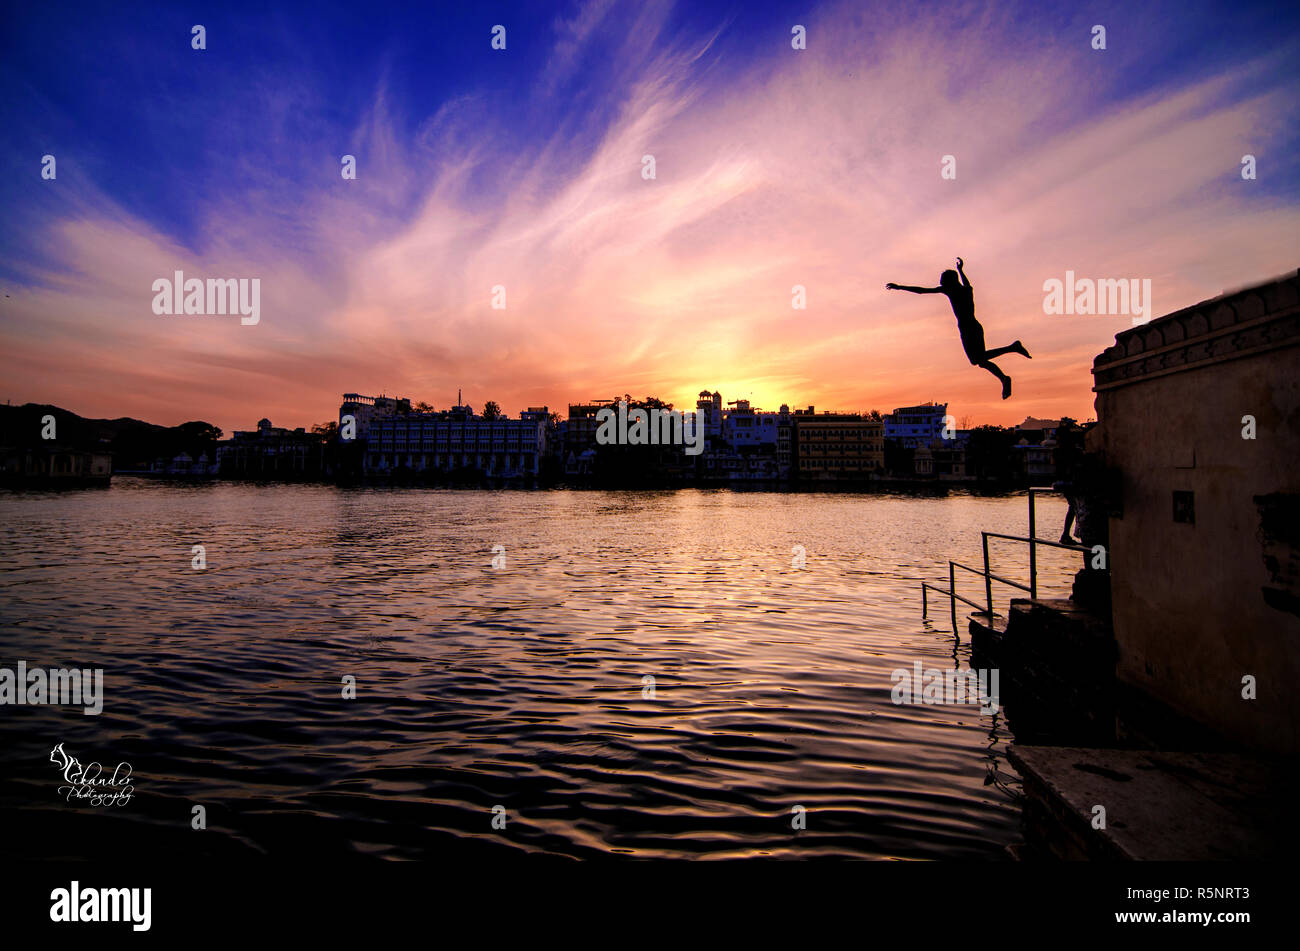 children jumping into lake pichola in udaipur. everyday you can see lot of children playing in water and jumping from these stages areound the lake. Stock Photo